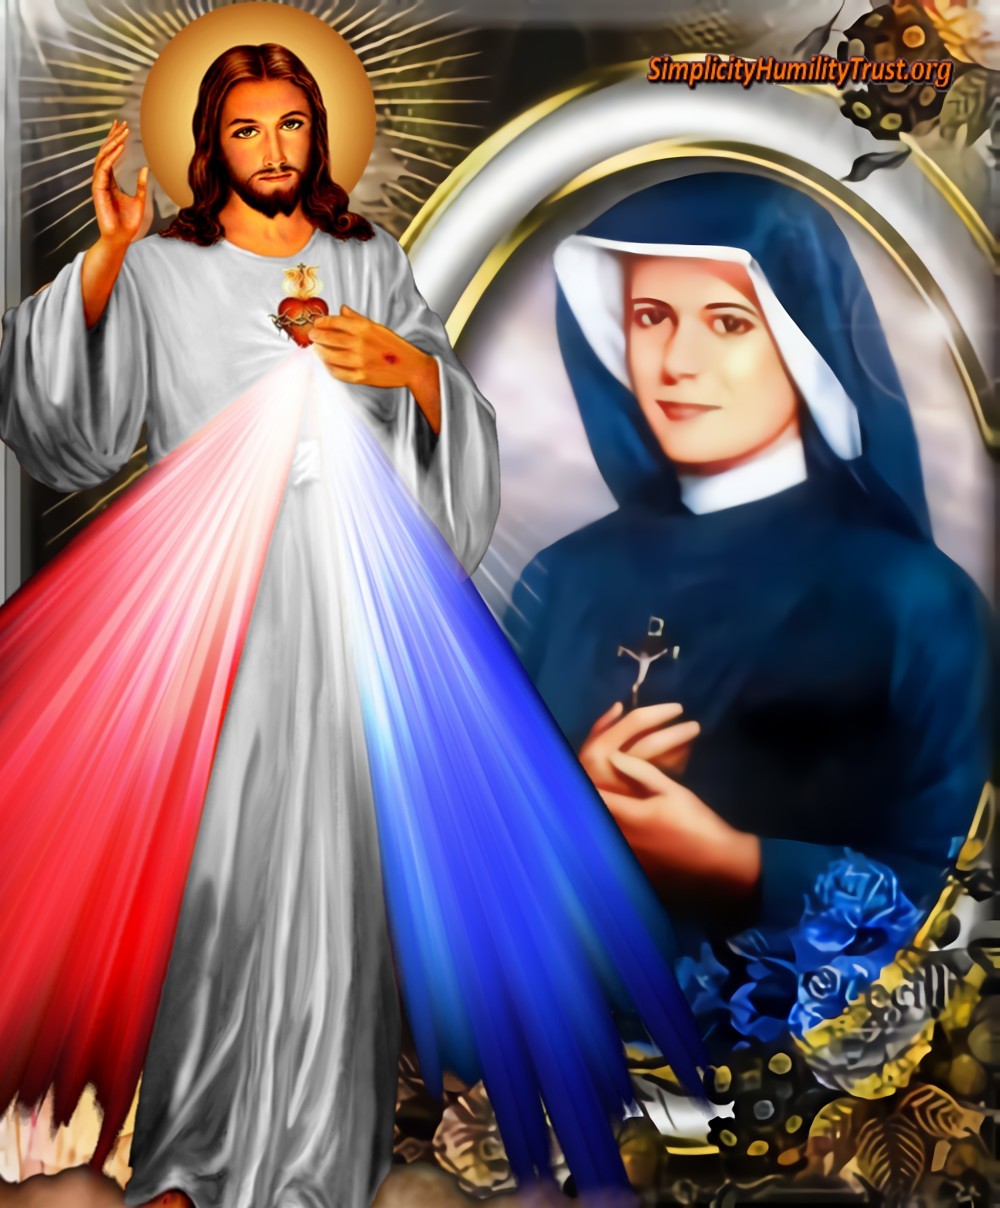 Sister Faustina, Apostle of Divine Mercy